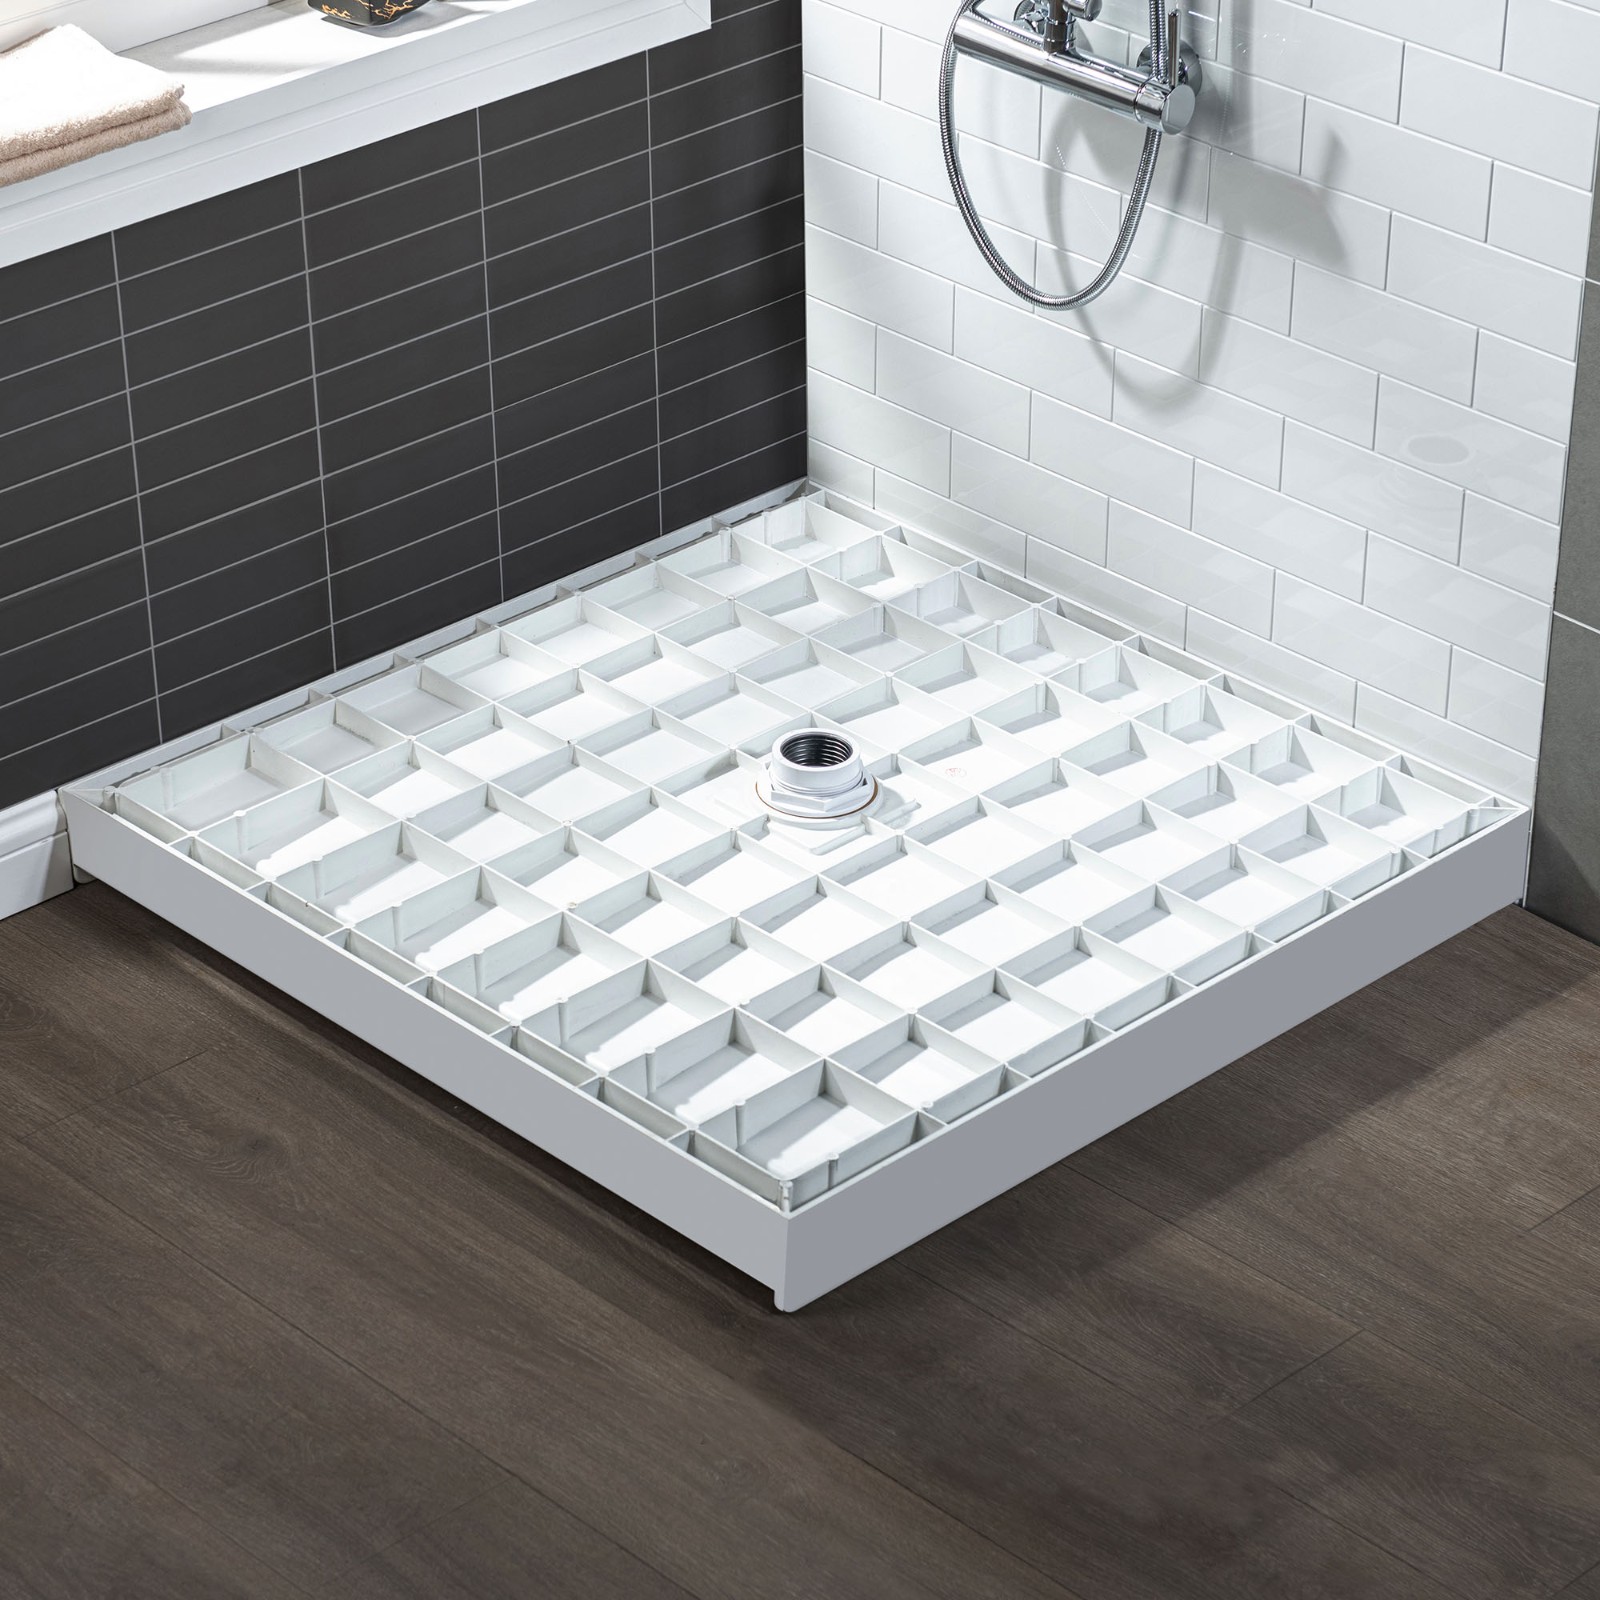  WOODBRIDGE SBR3636-1000C-CH SolidSurface Shower Base with Recessed Trench Side Including  Chrome Linear Cover, 36